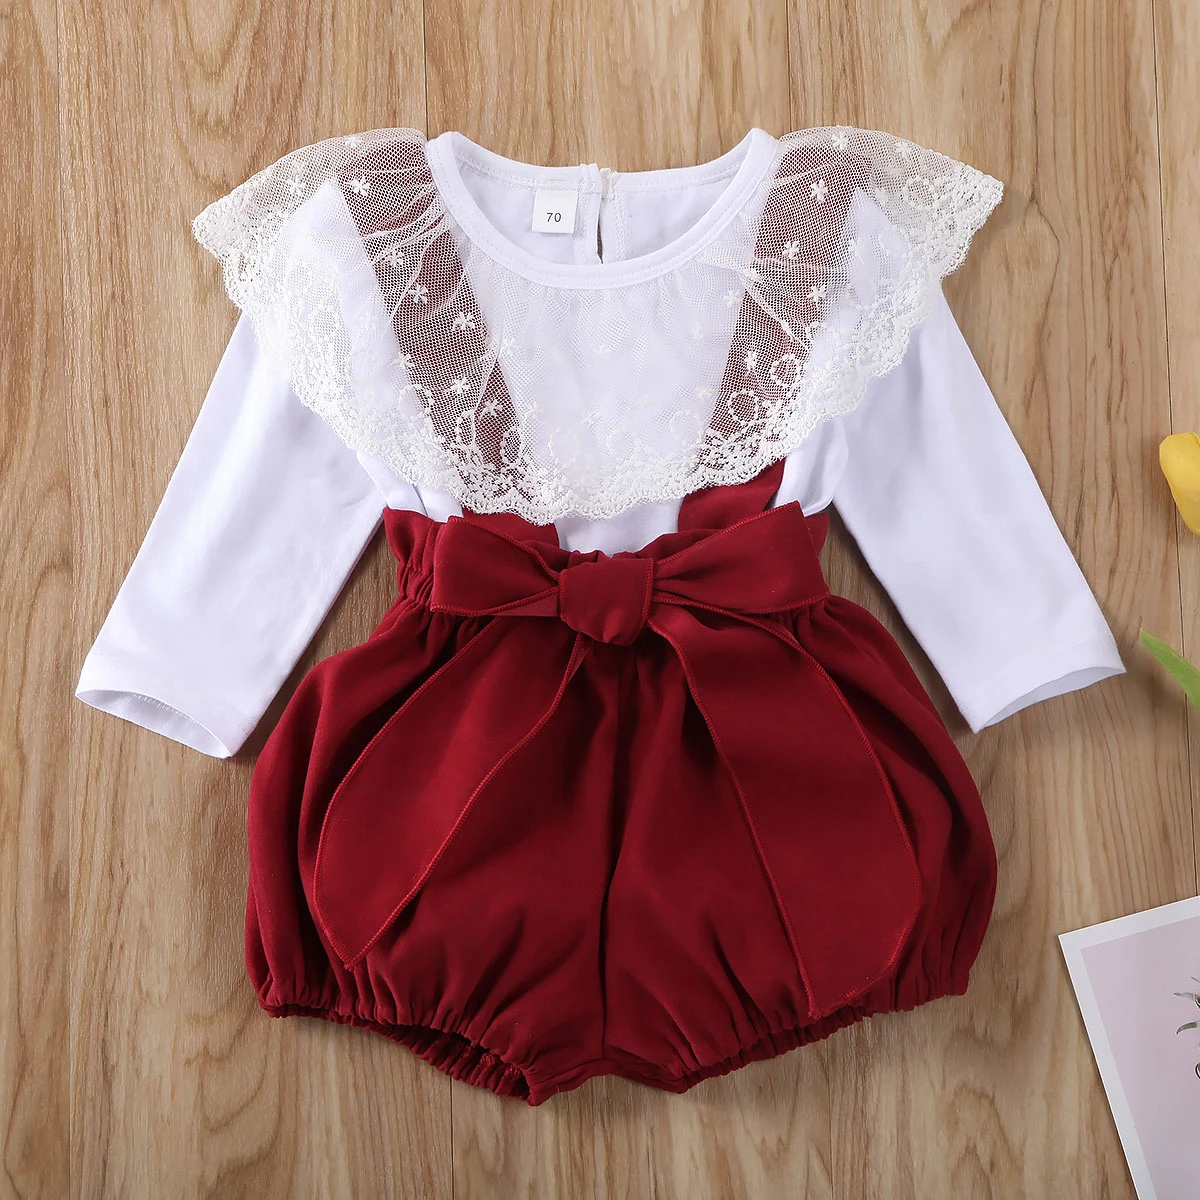 Baby Girl Clothes Set Solid Color Lace Ruffle Long Sleeve Tops Shorts Overalls 2Pcs Outfits Cotton Clothes